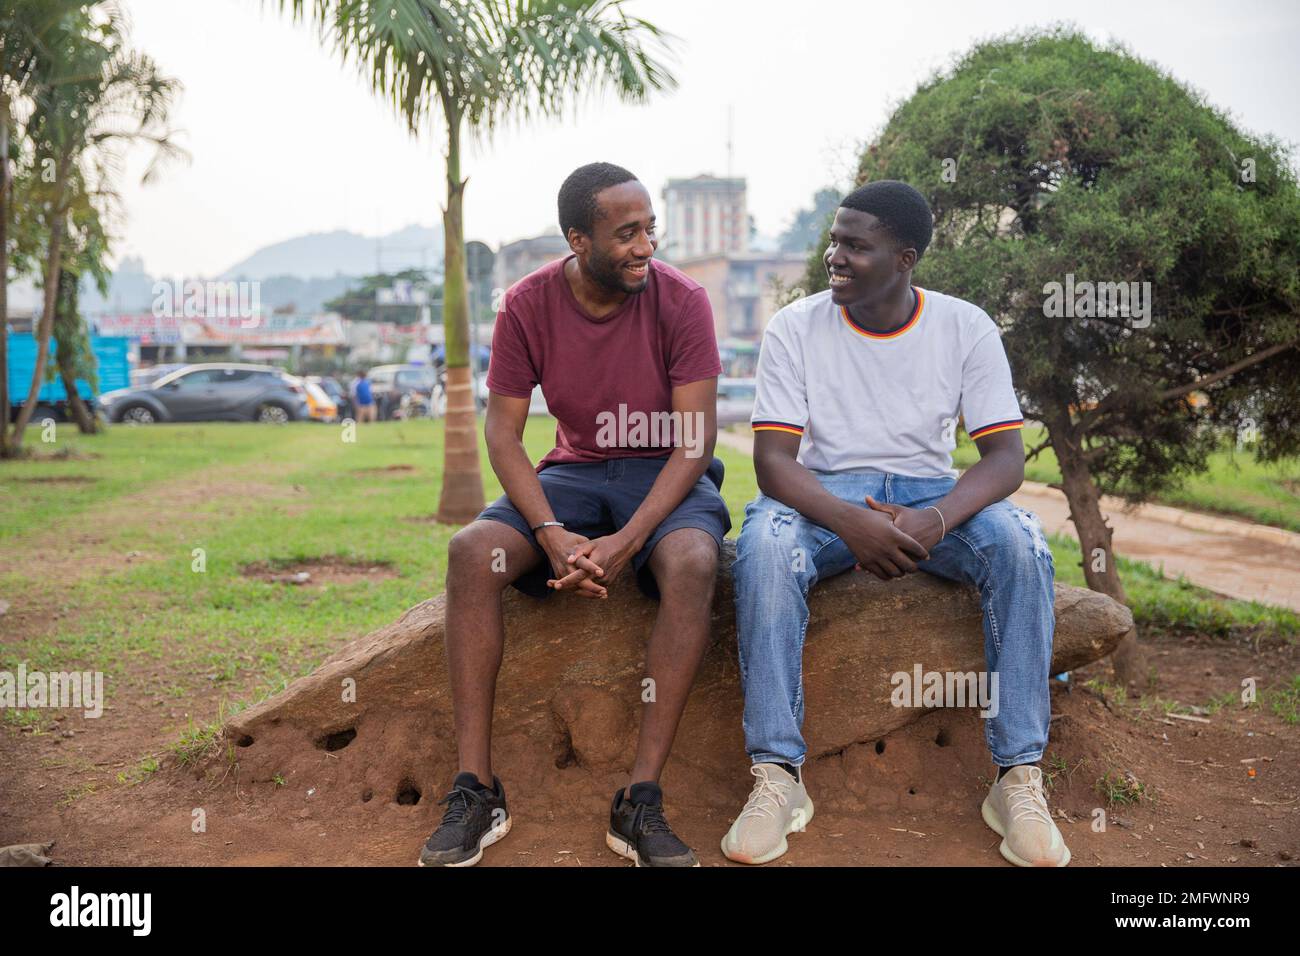 Two friends laugh as they look at each other in a public park in Africa Stock Photo